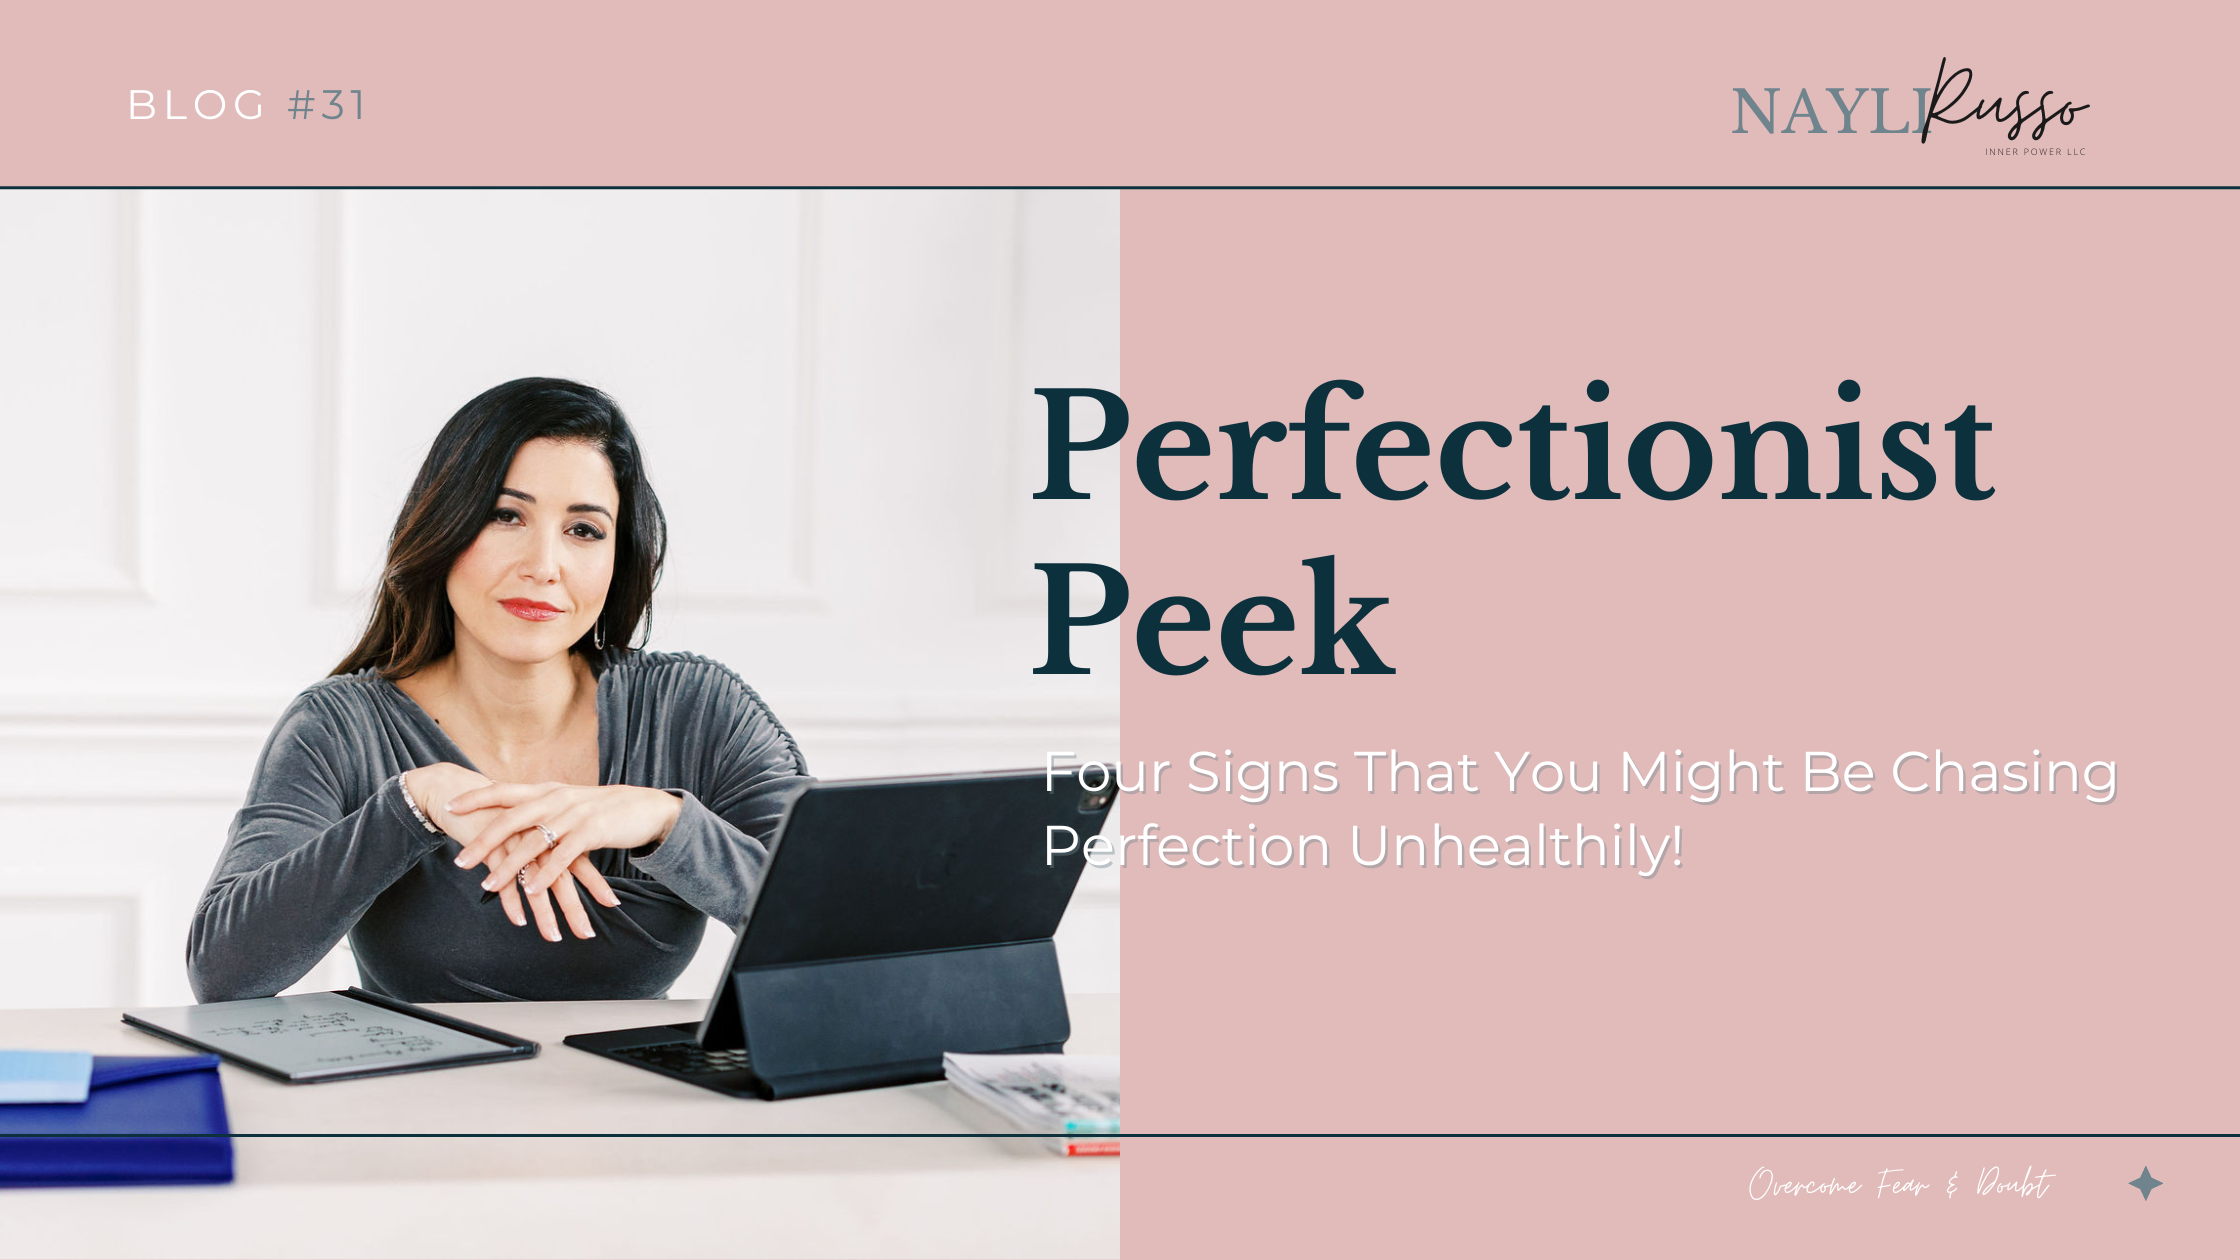 Four Signs You Are A Perfectionist

